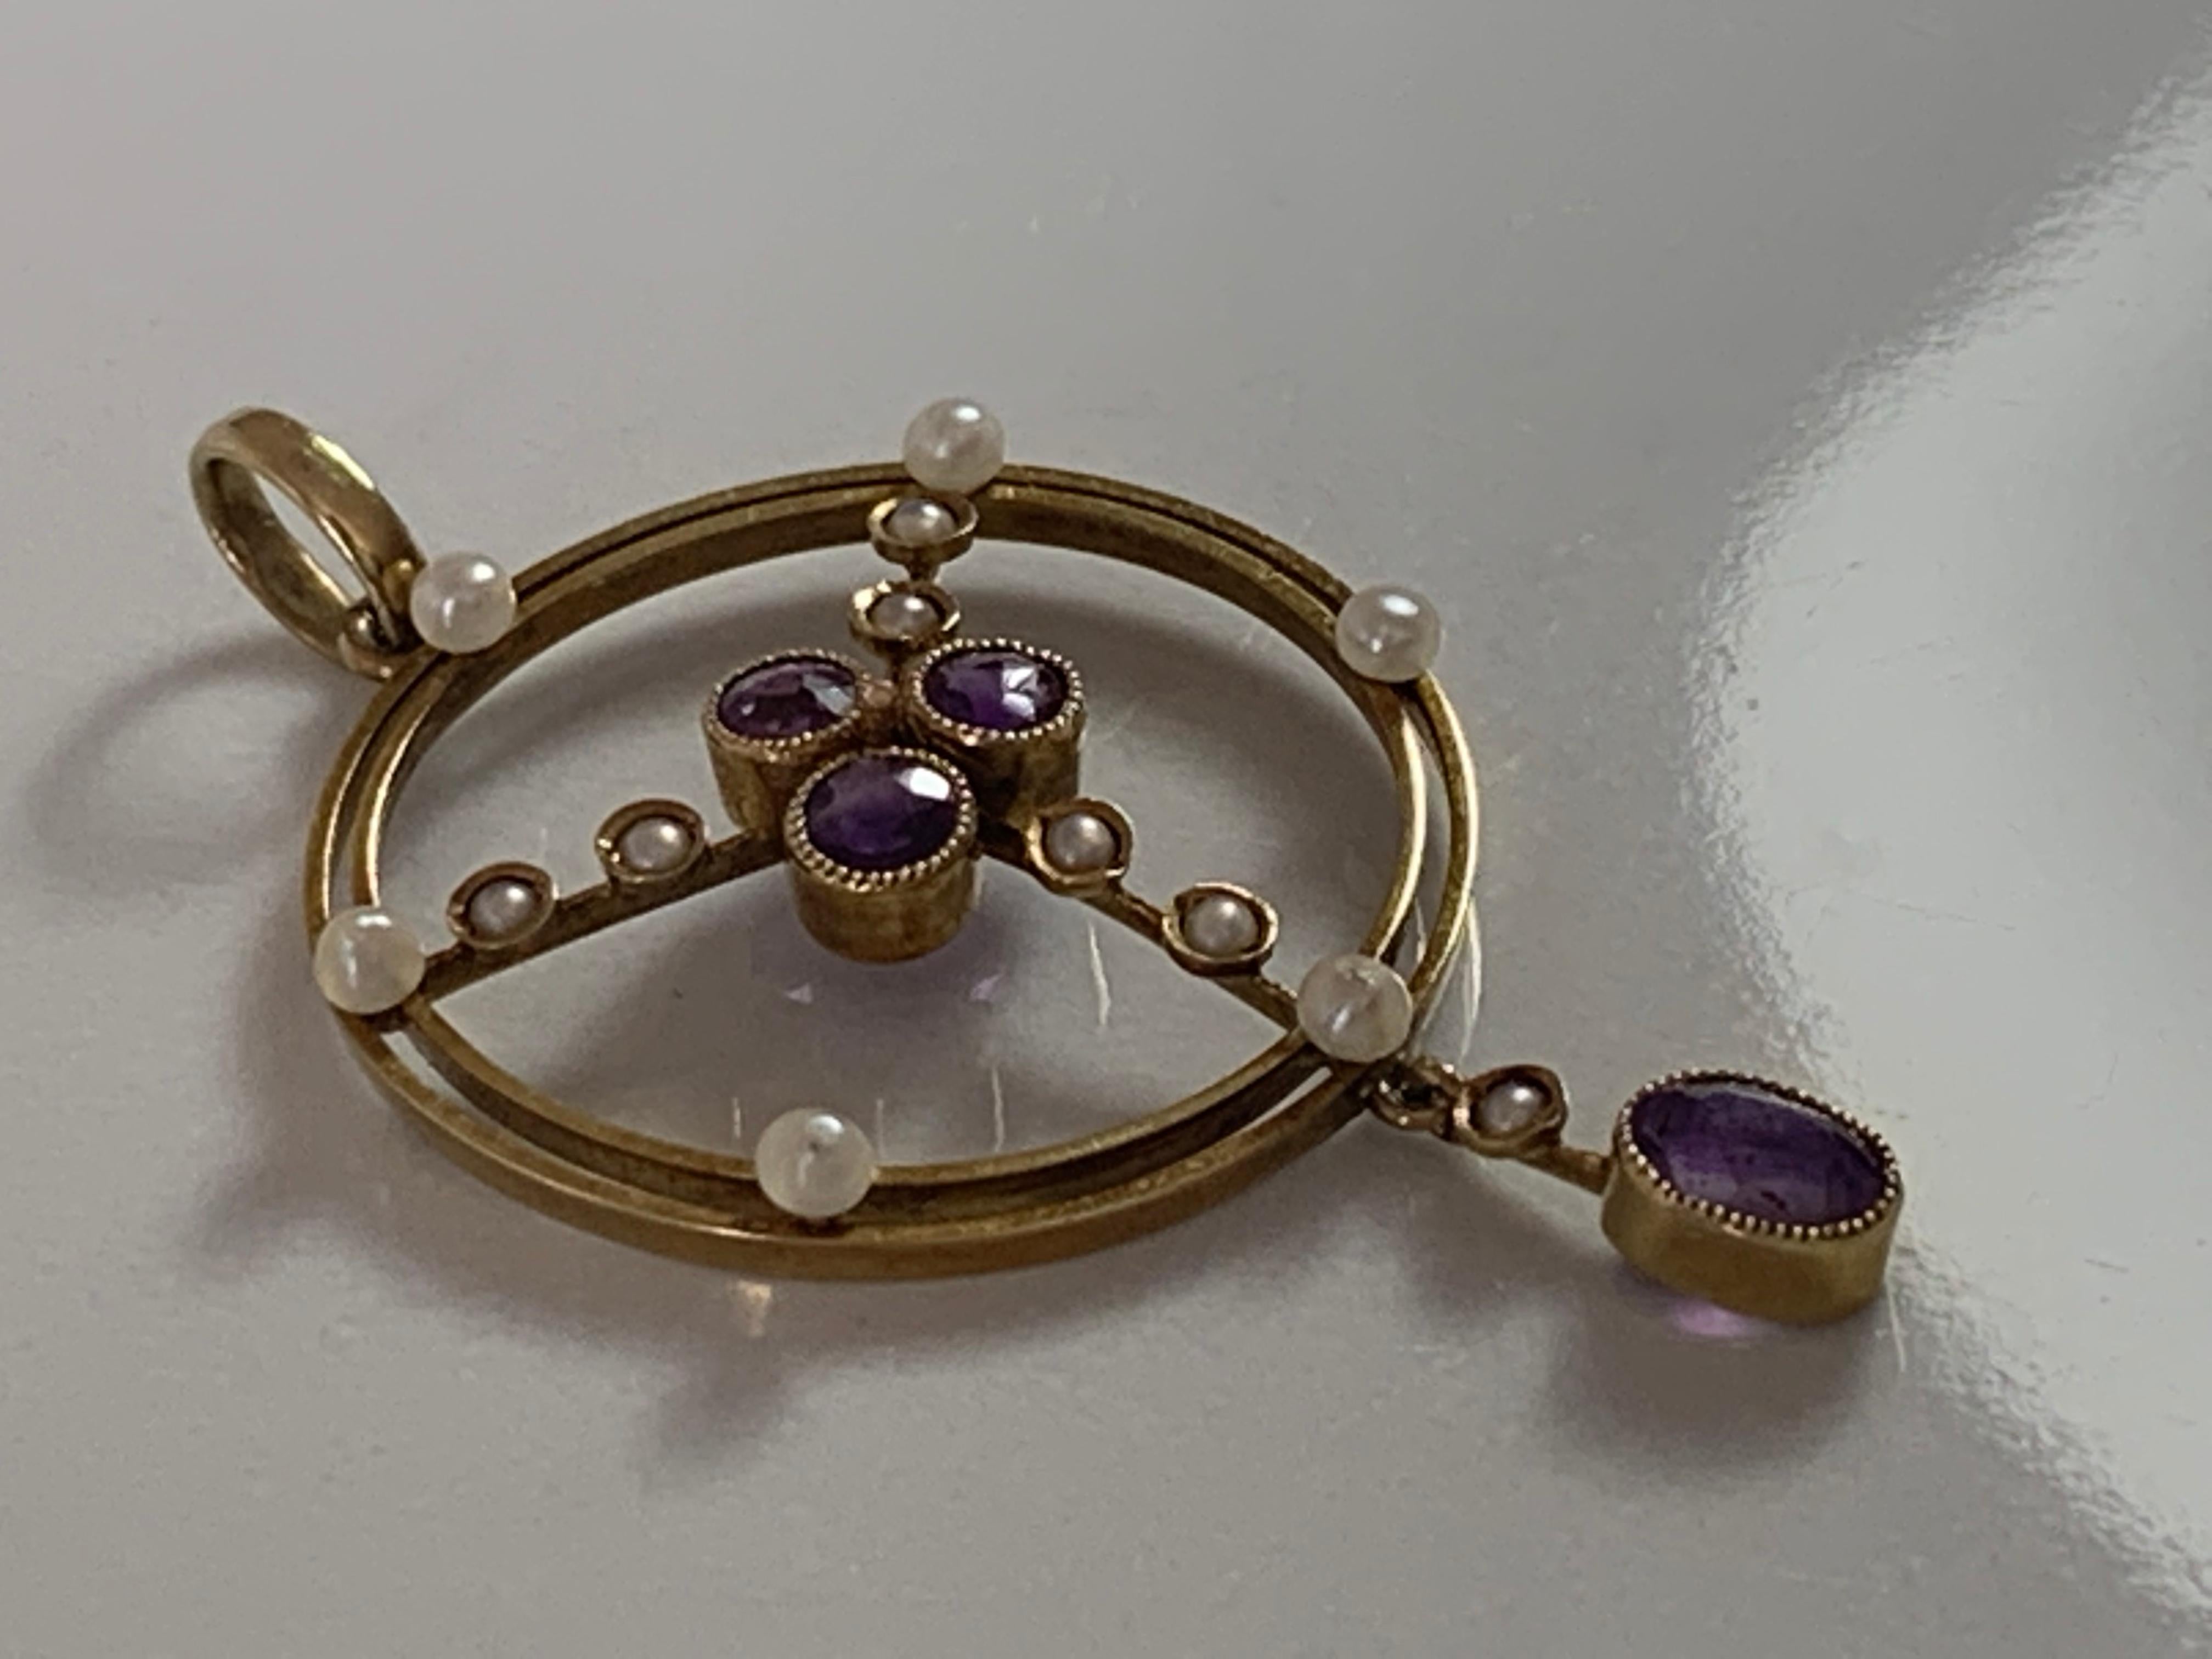 Edwardian 15ct 585 Gold Antique Pearl & Amethyst Pendant For Sale